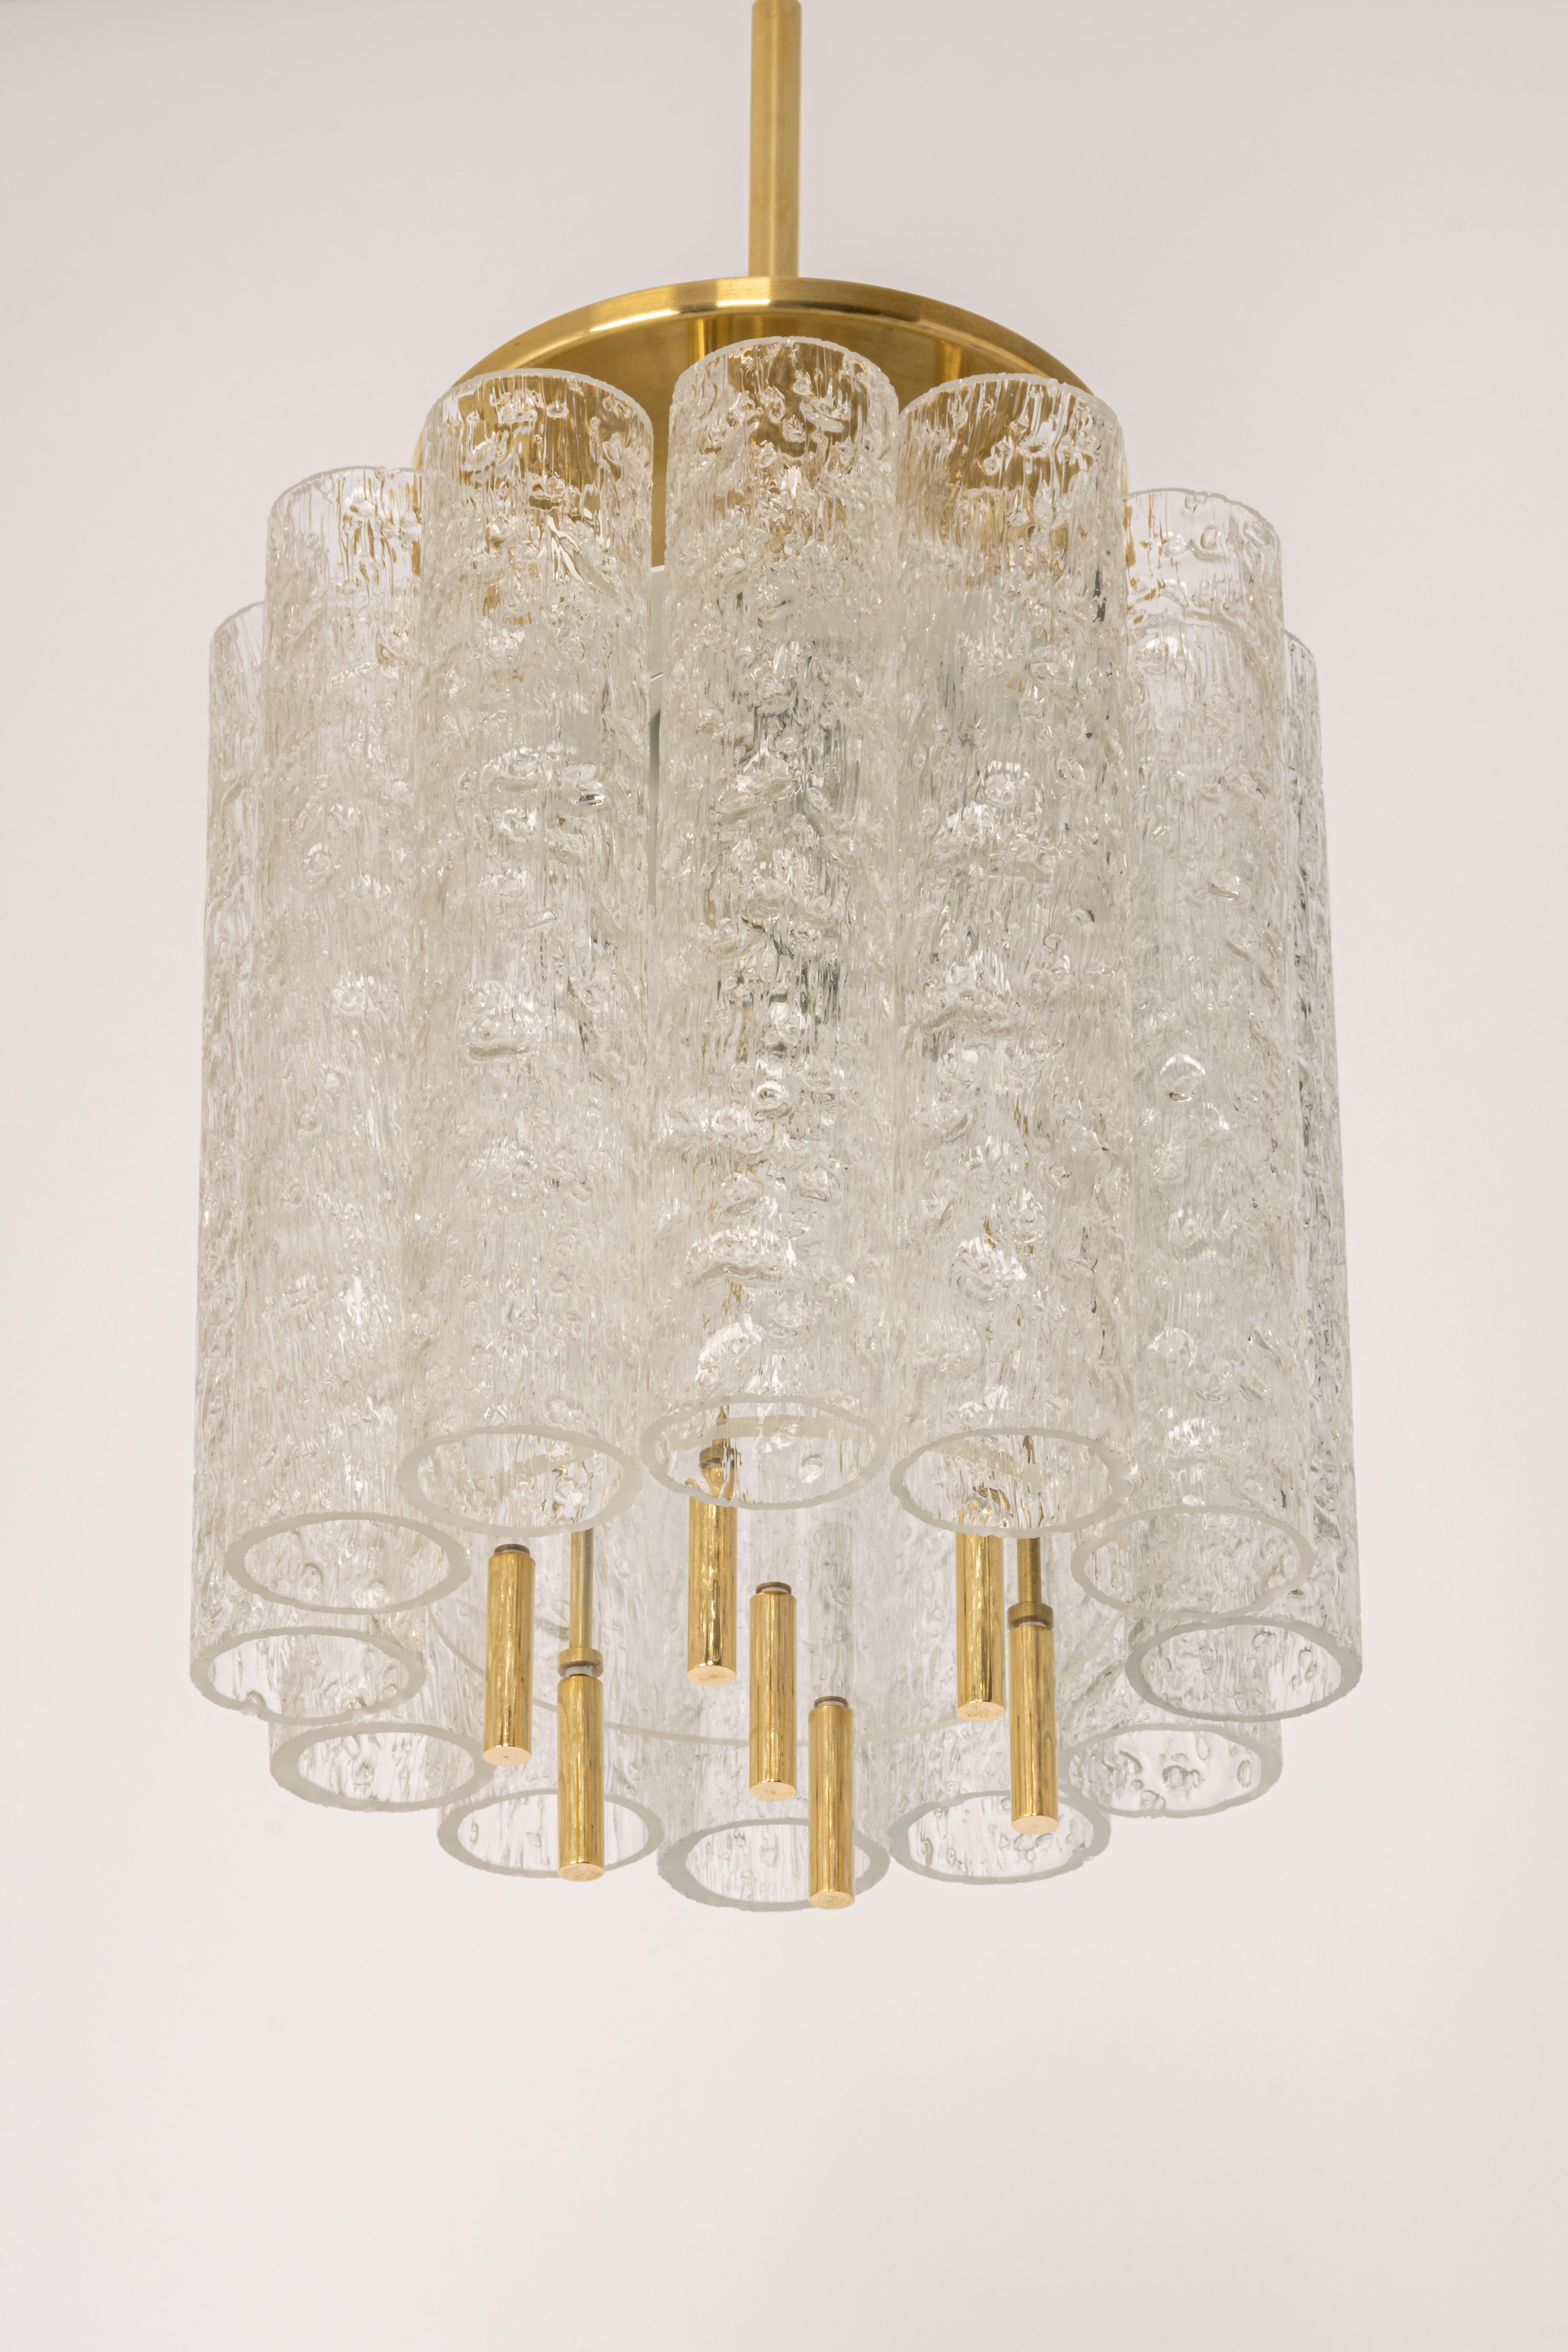 Mid-Century Modern Pair of Petite Murano Glass Tubes Pendant Light by Doria, Germany, 1960s For Sale